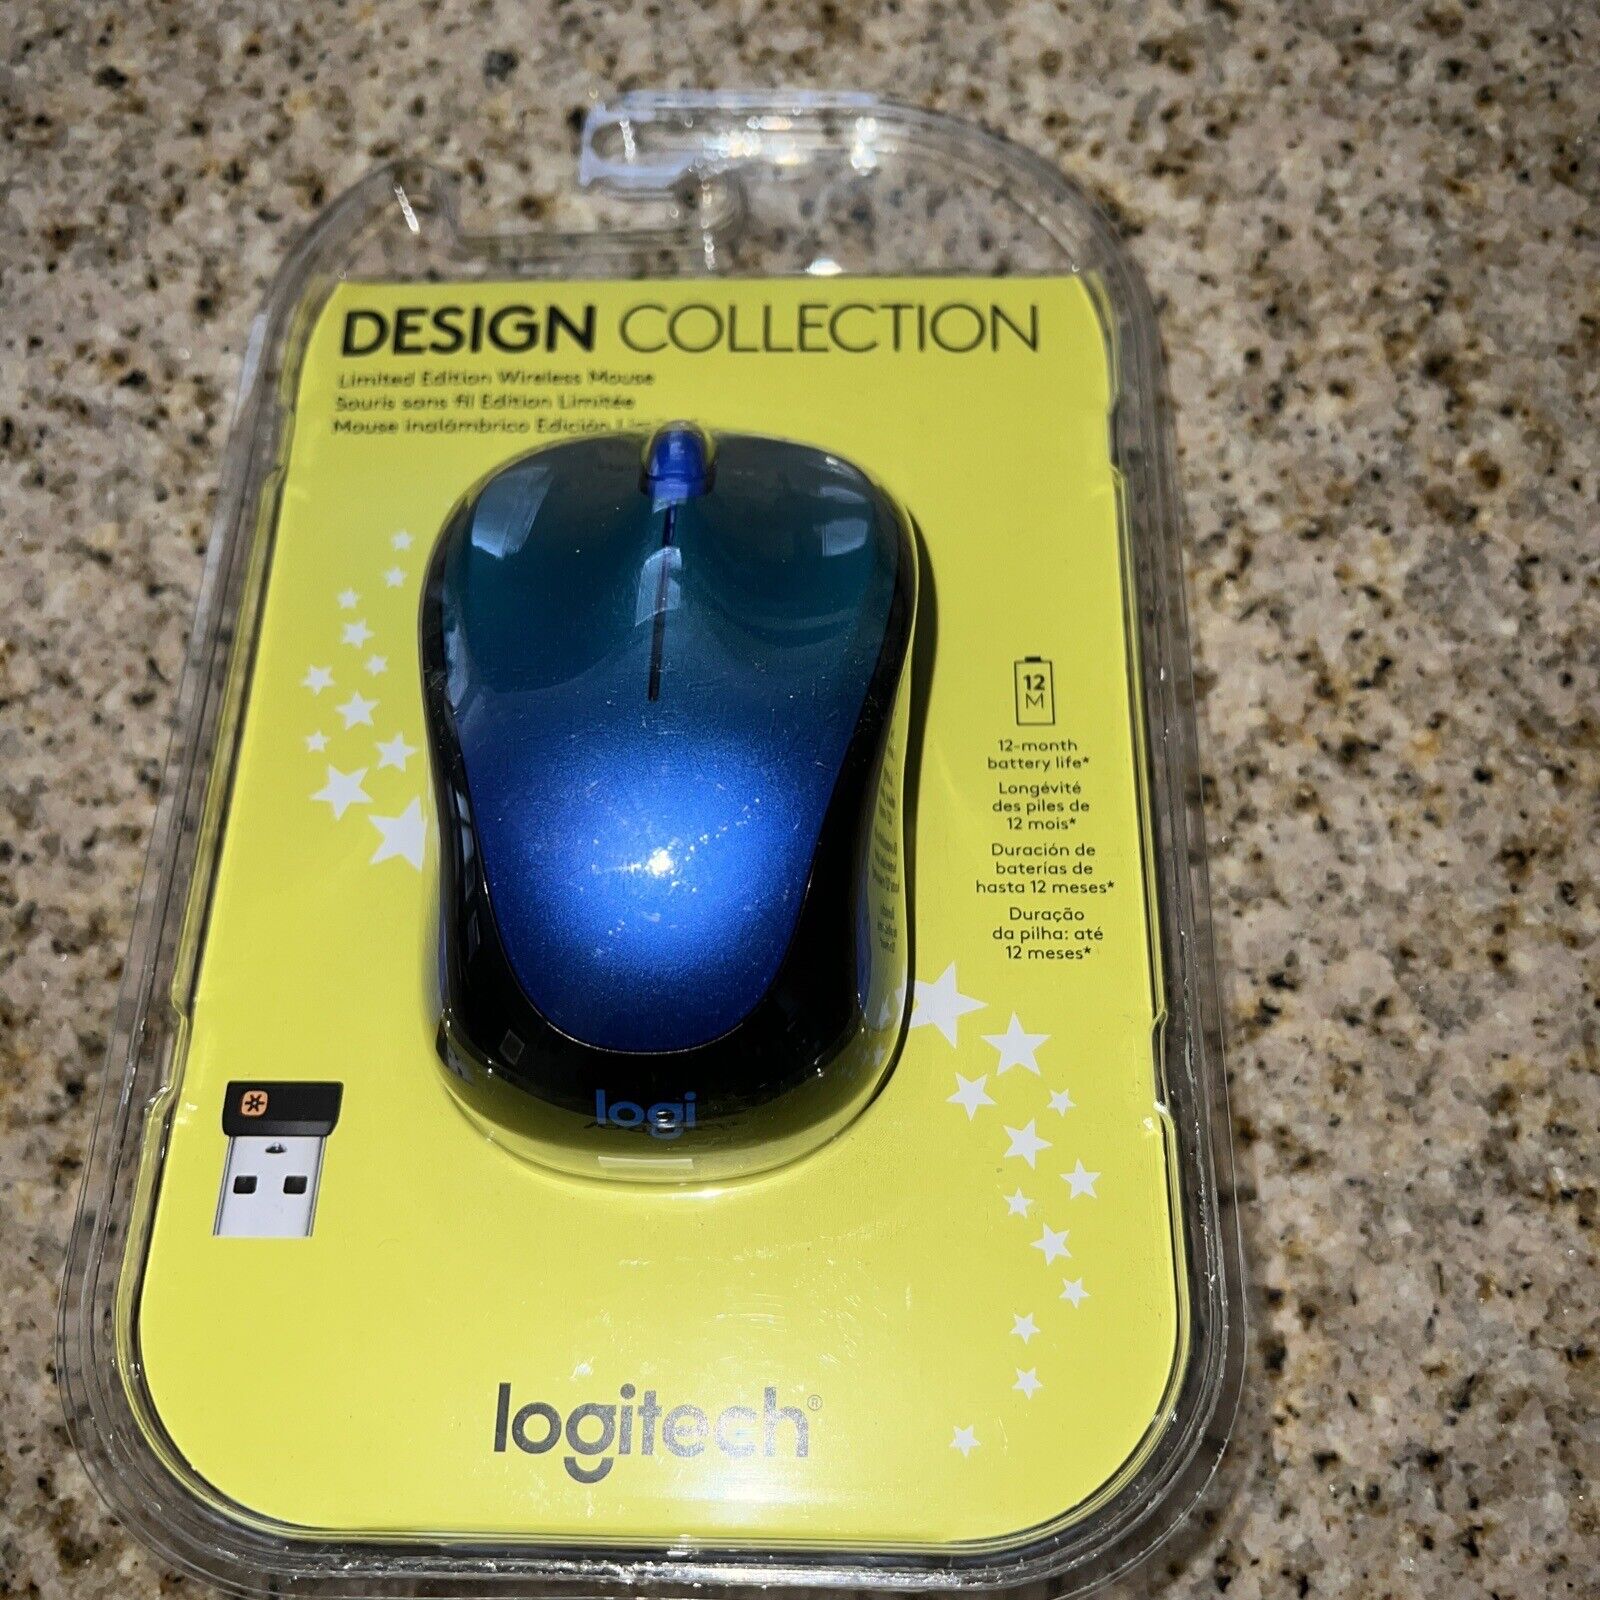 Logitech Design Collection Limited Edition Wireless Mouse - Blue Aurora...